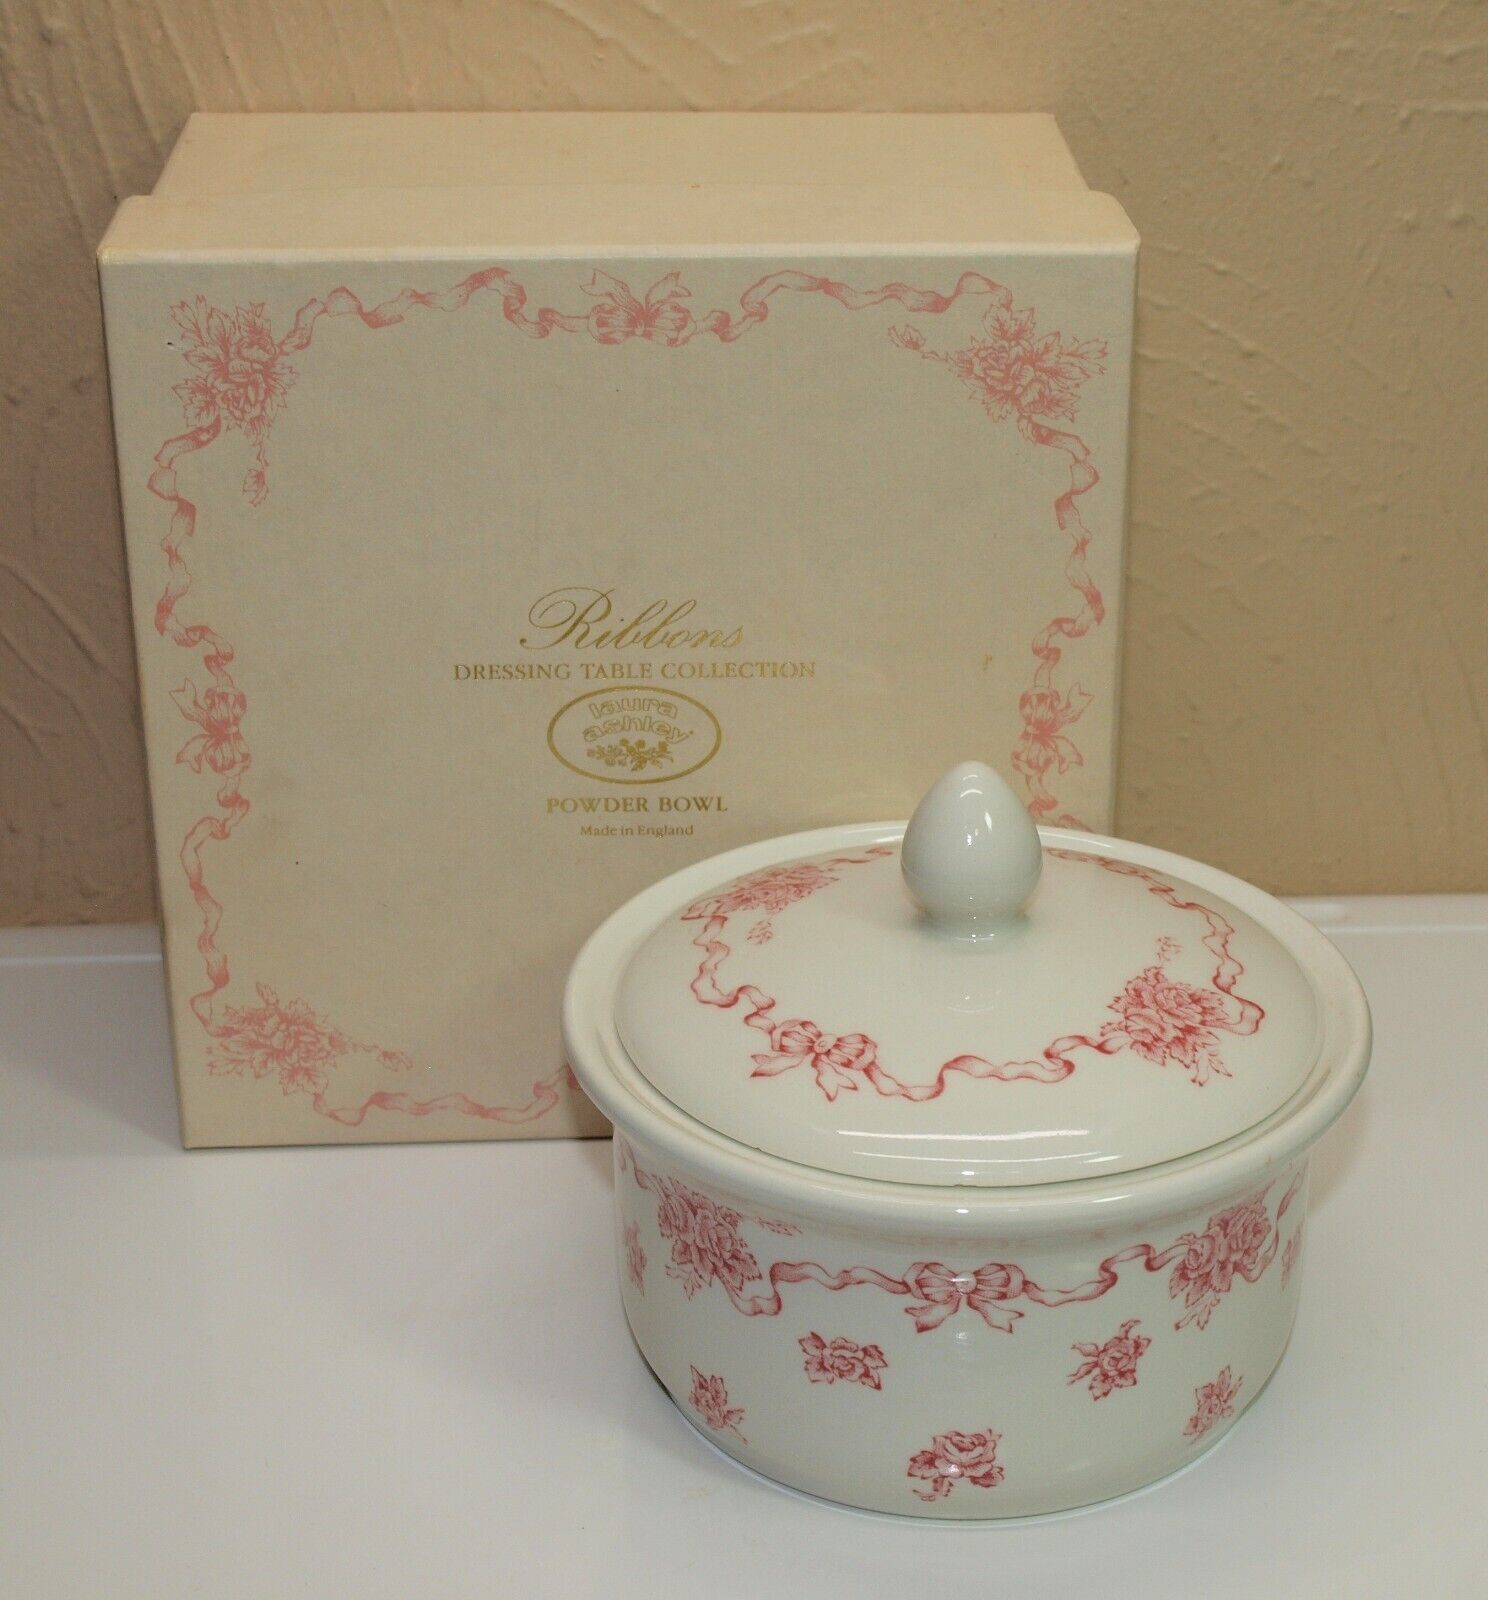 Vintage LAURA ASHLEY RIBBONS Pink & White POWDER BOWL Dressing Table Collection